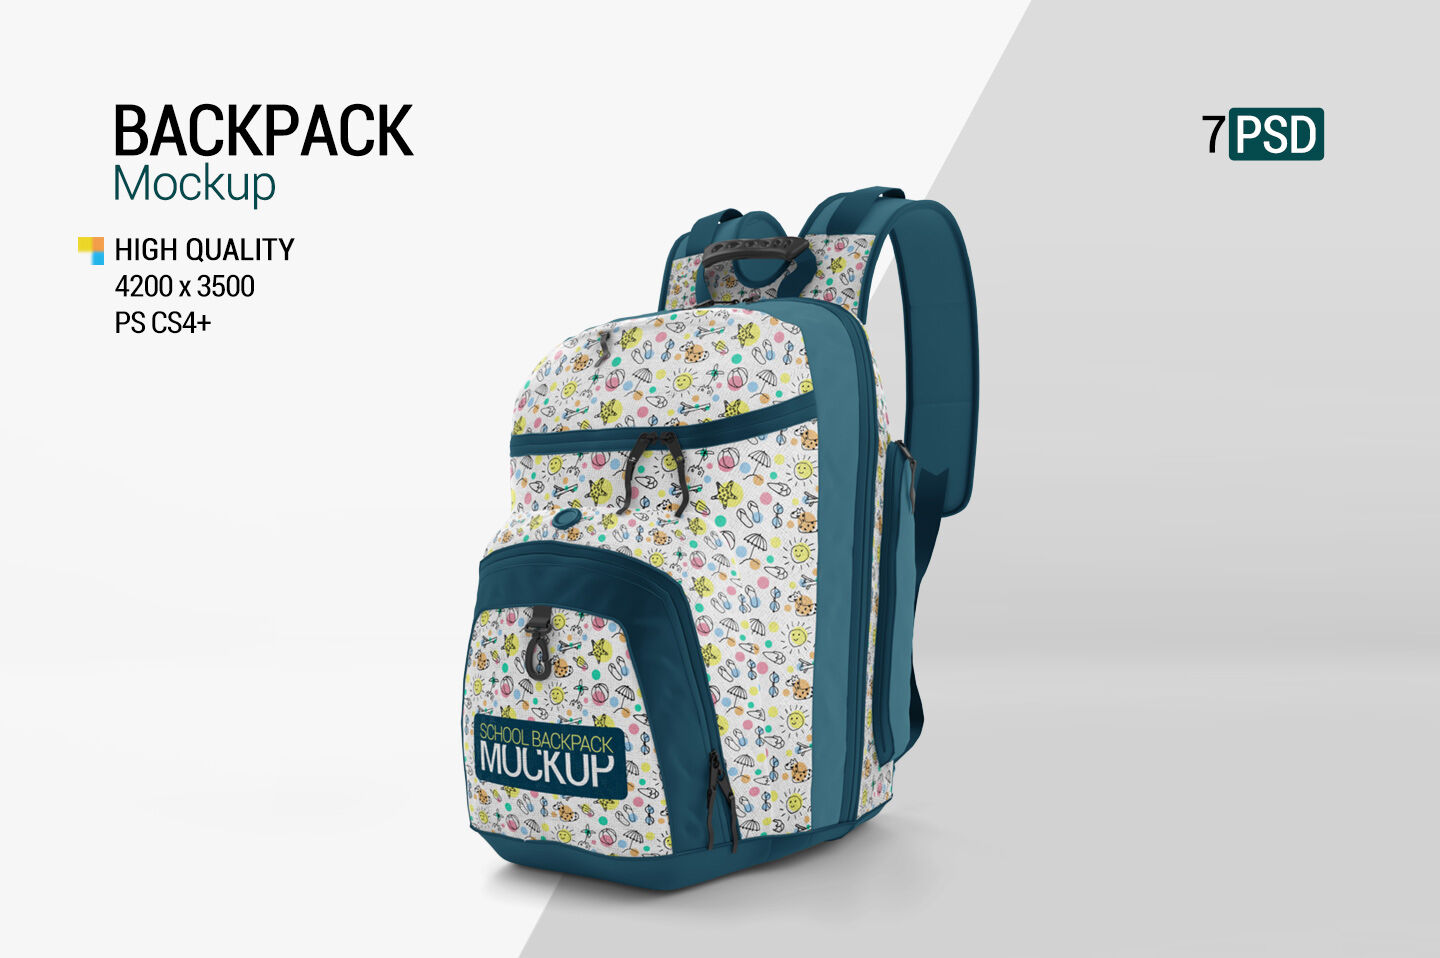 Download Backpack Mockup By Pixelica21 | TheHungryJPEG.com